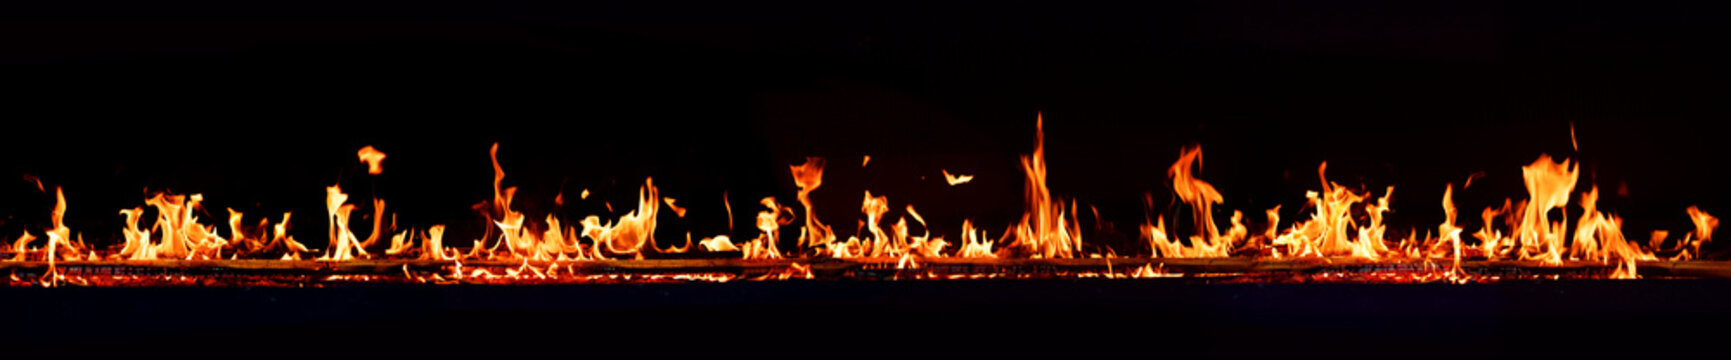 Horizontal fire flames with dark background